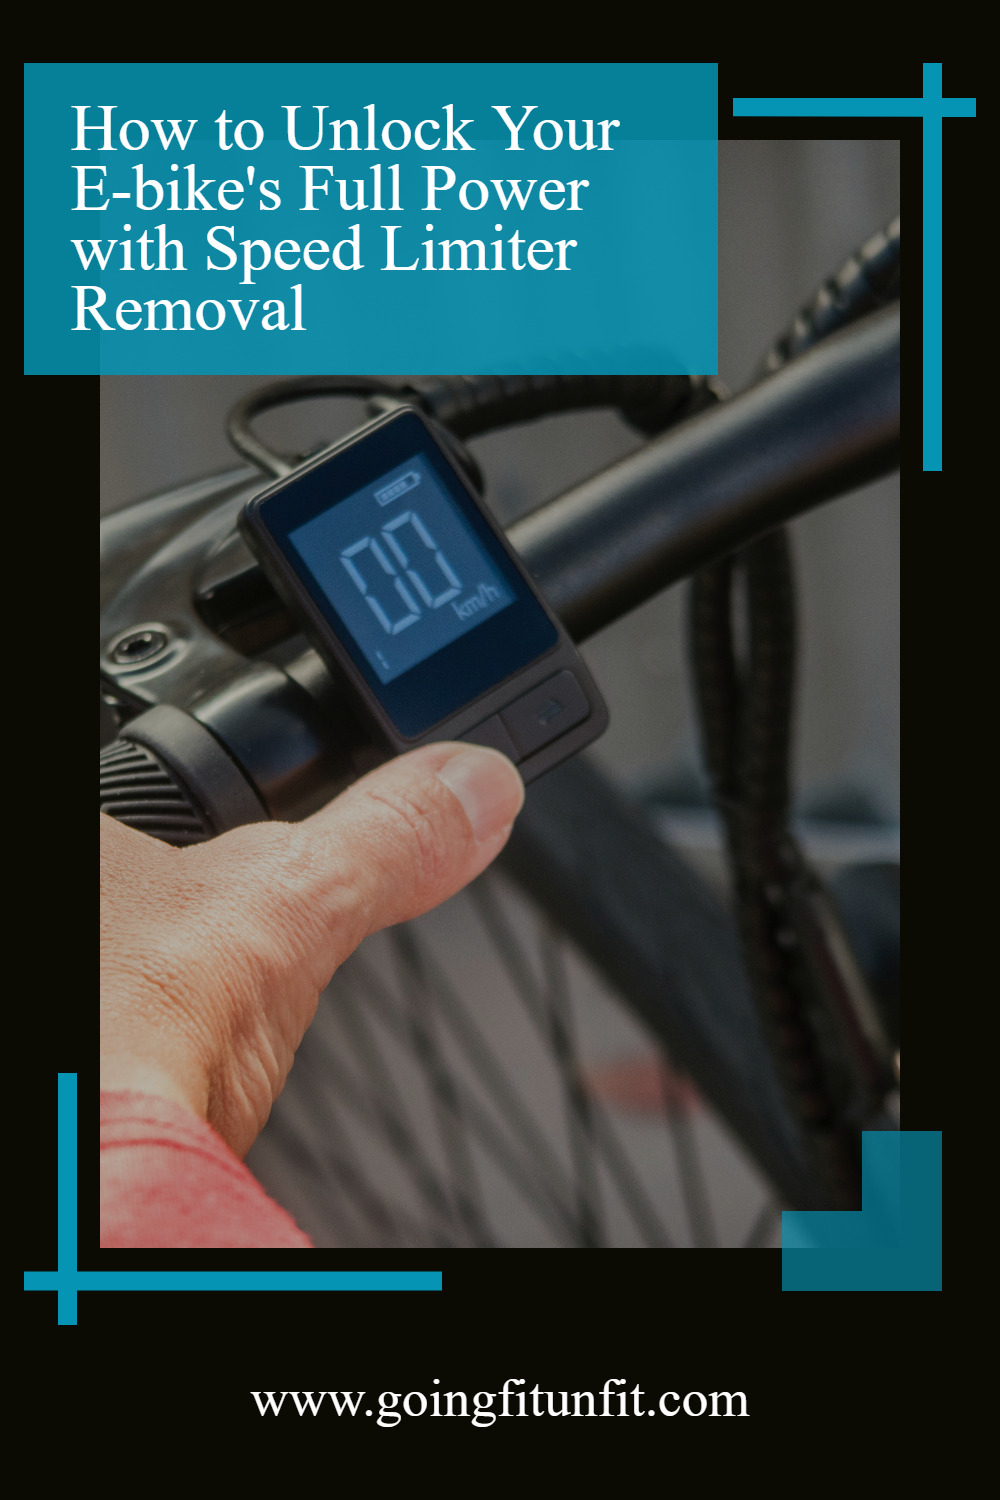 How to Unlock Your E-bike’s Full Power with Speed Limiter Removal